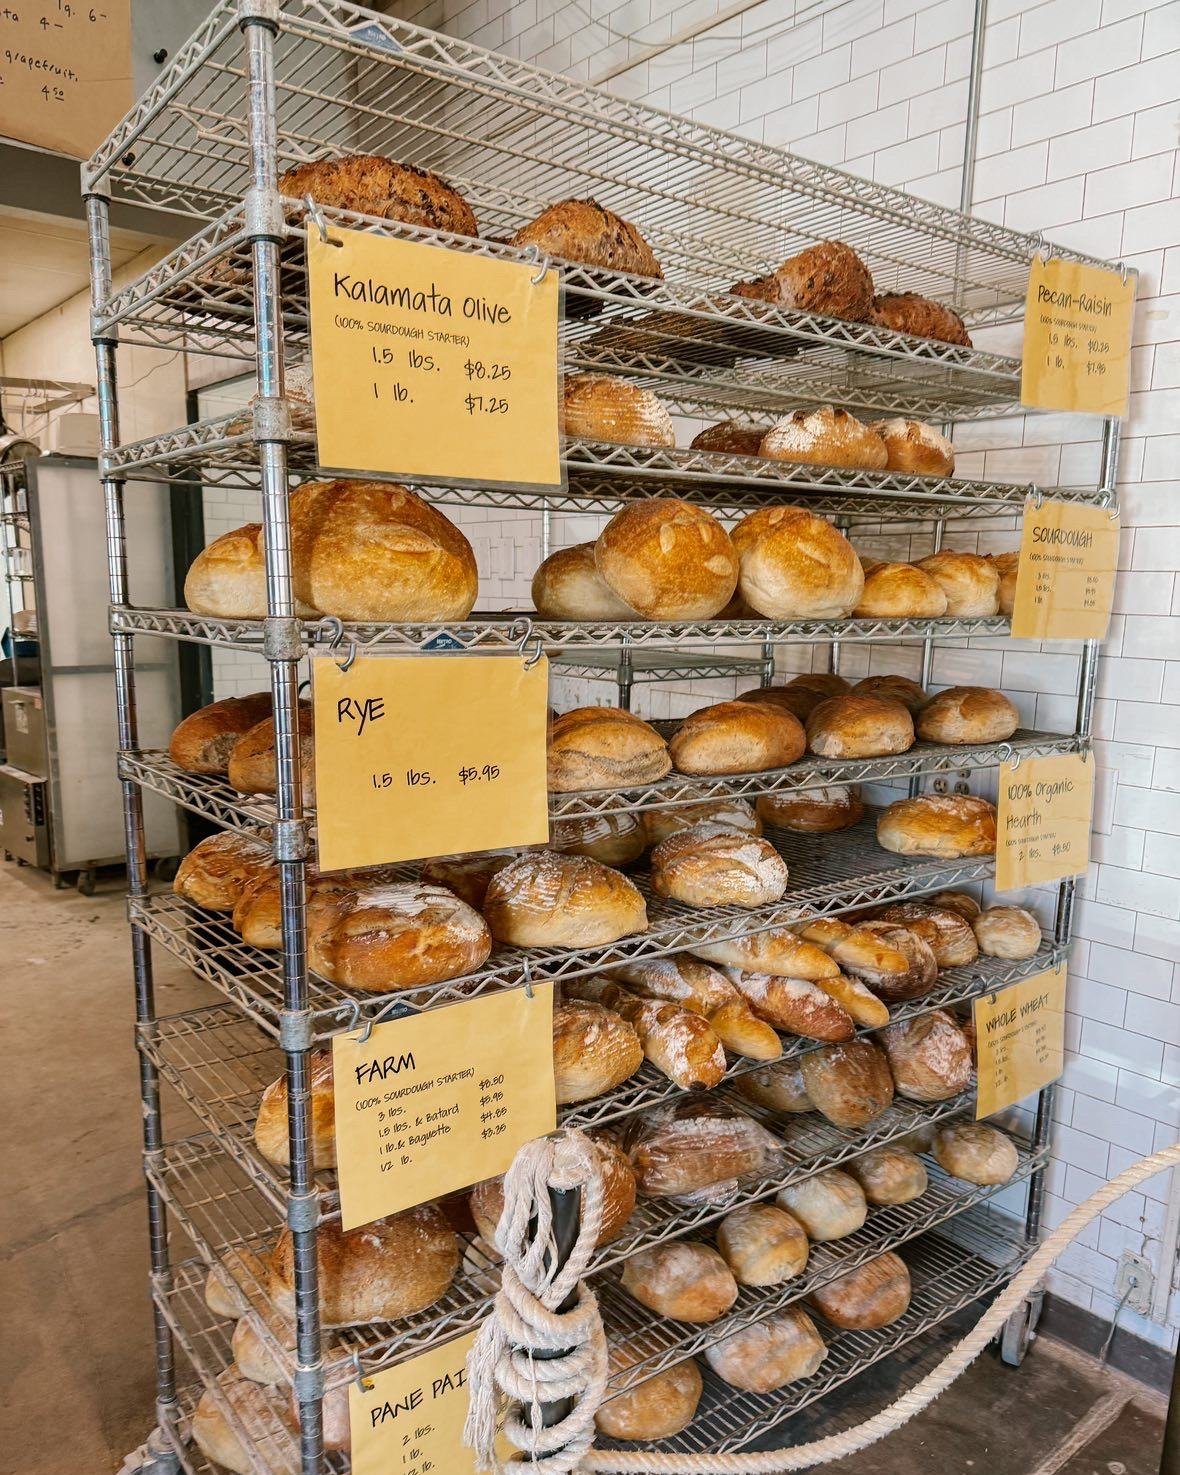 Kalamata olive, rye, farm, sourdough&hellip;and more. The choice is yours.
#SageBakehouse